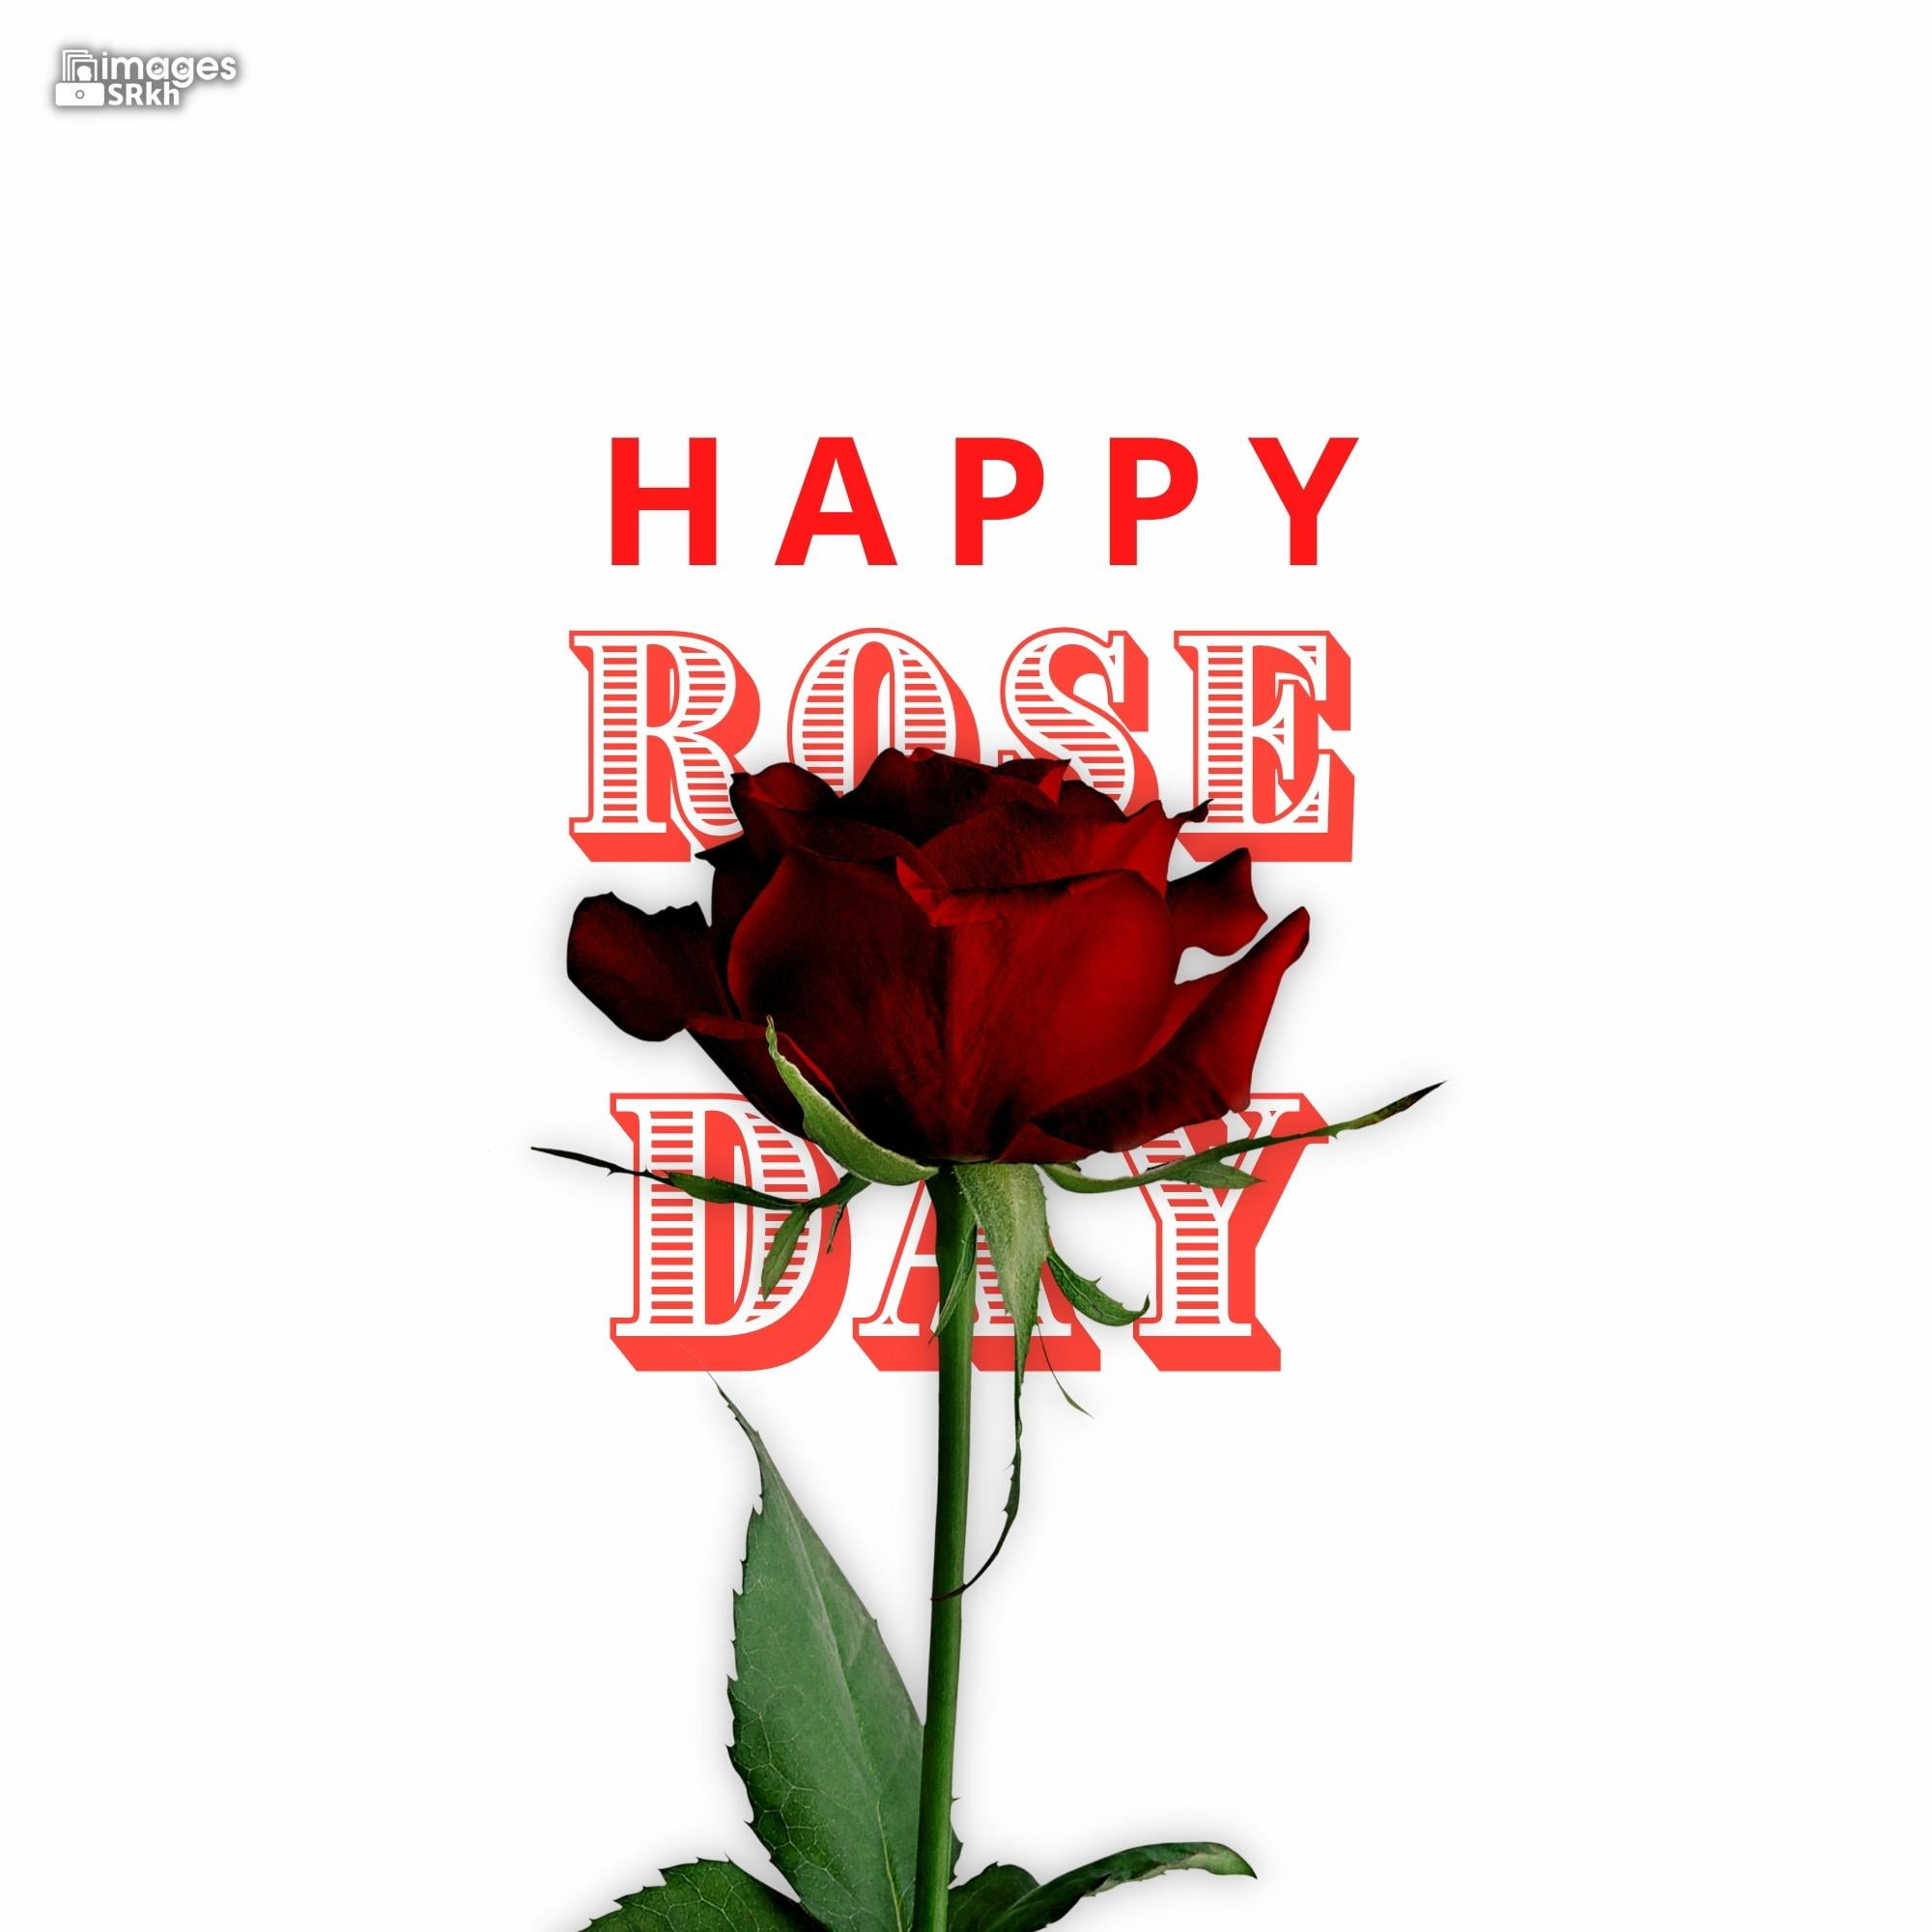 Happy Rose Day Image Hd Download (59)